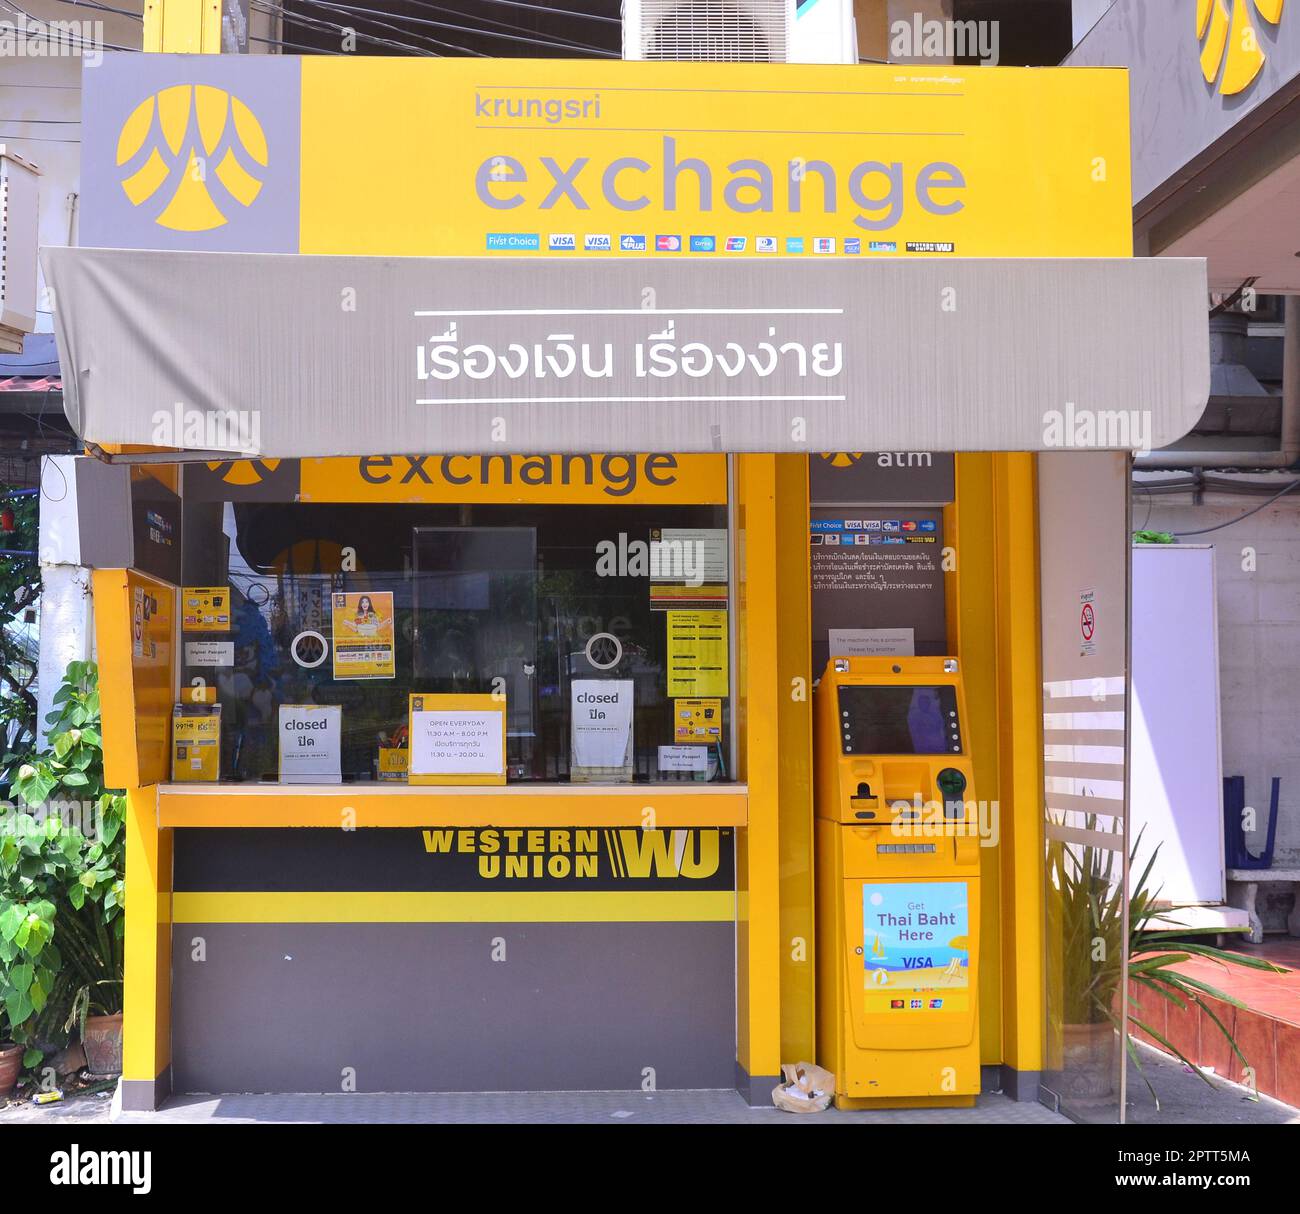 A foreign exchange or currency exchange booth or shop, operated by Krungsri Bank, where people can change currencies in Thailand, Asia. Stock Photo